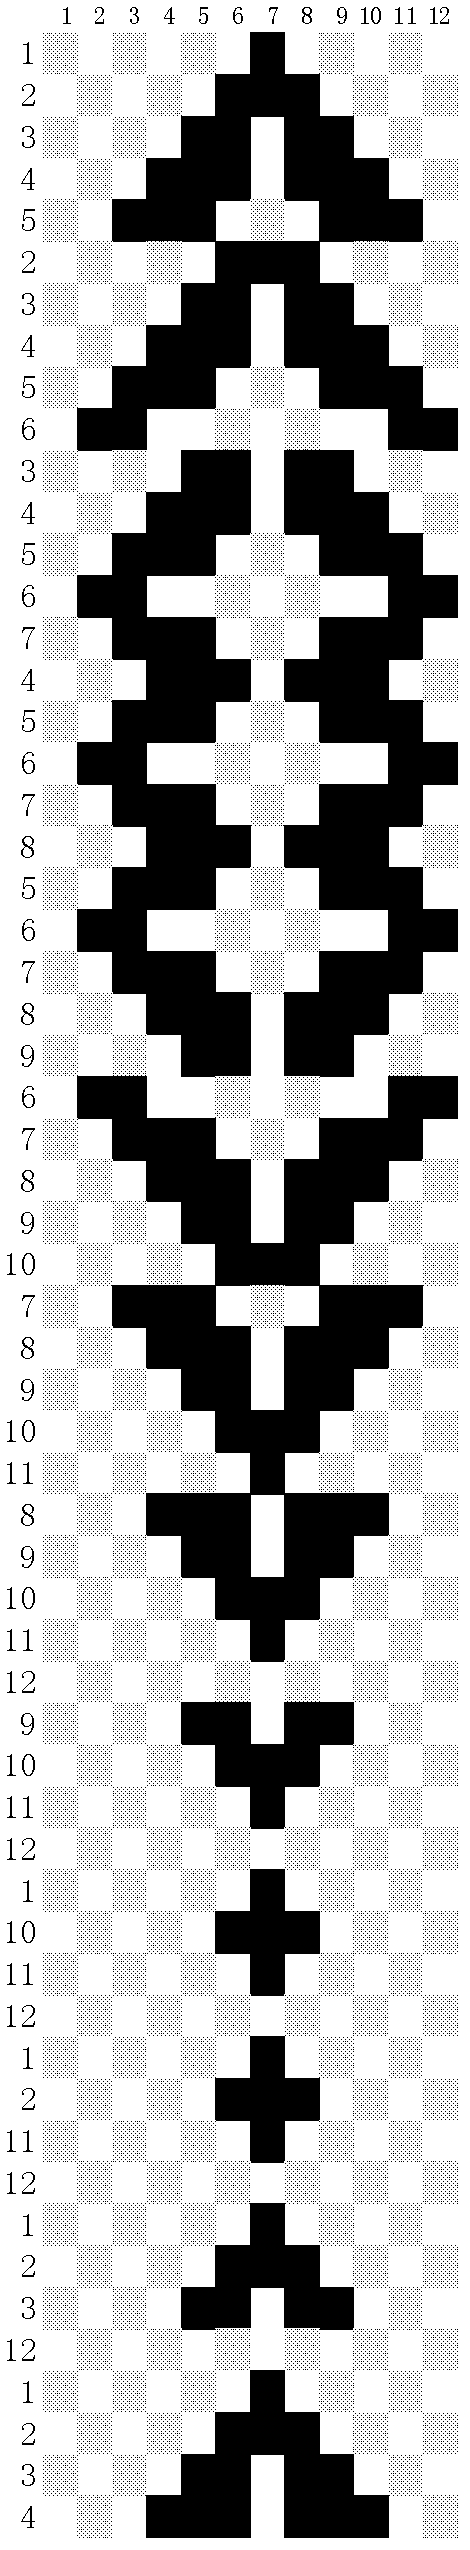 Method for producing jacquard-like pattern with dobby loom